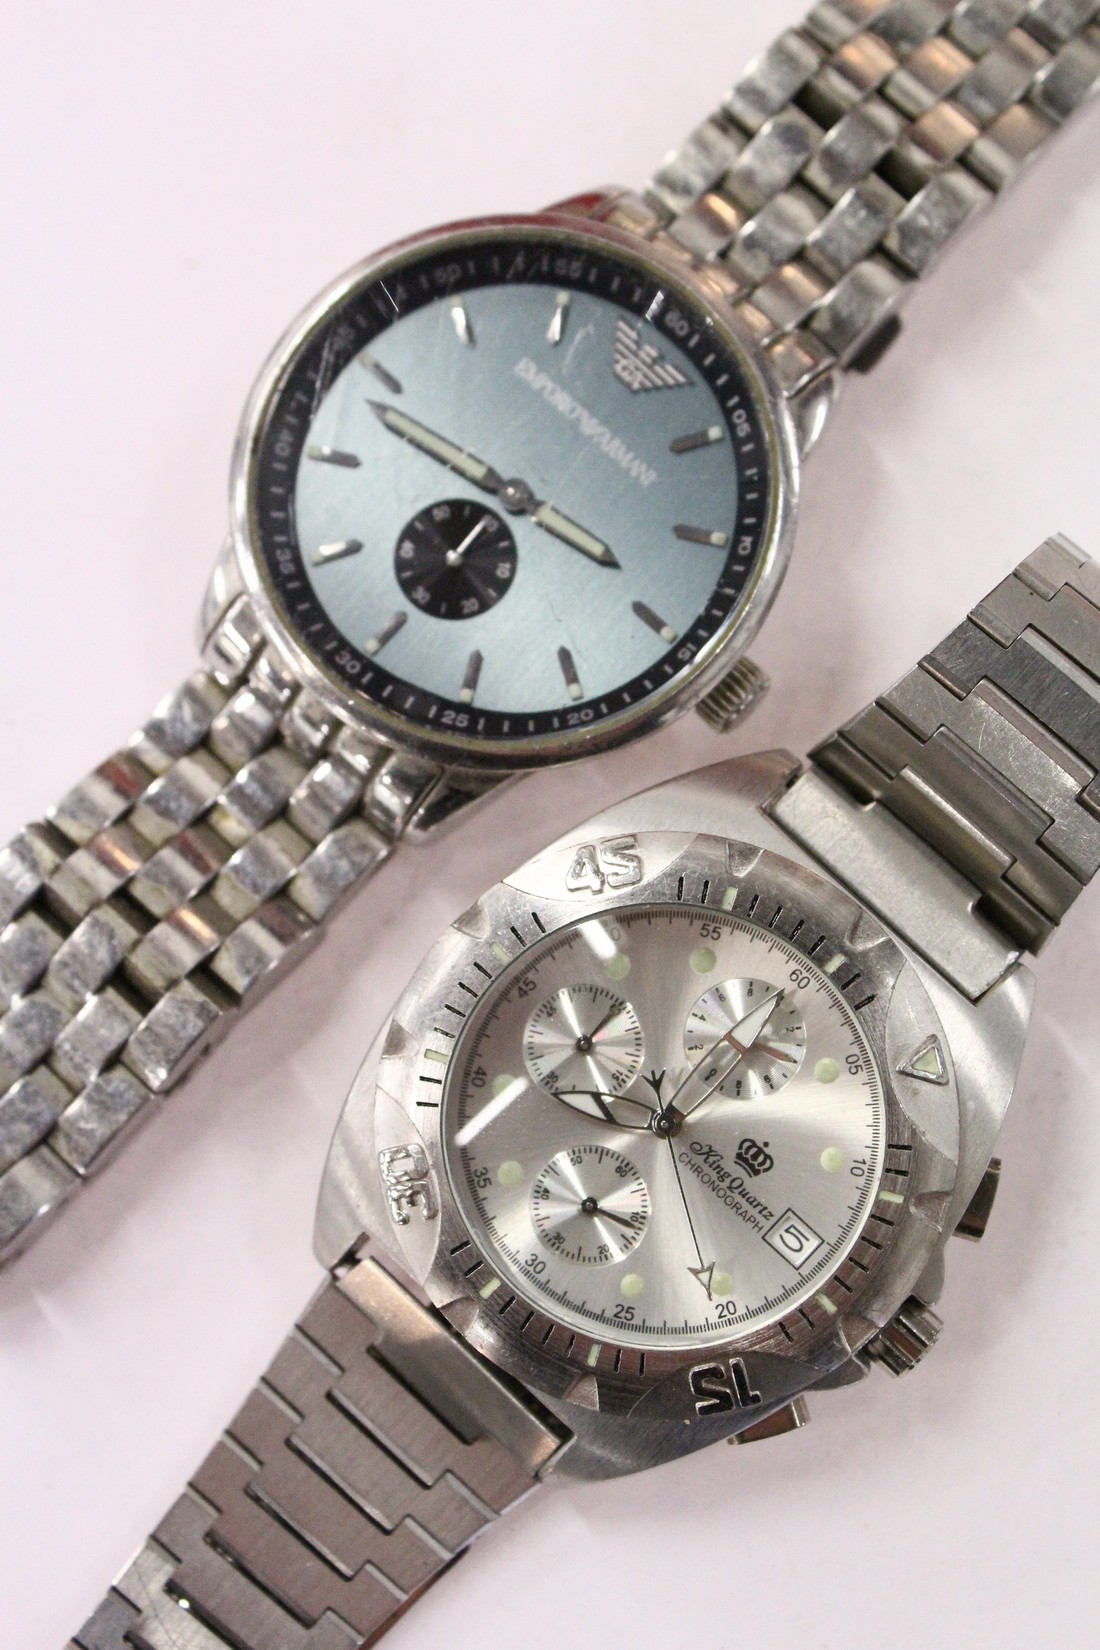 Two gent's stainless steel wristwatches.